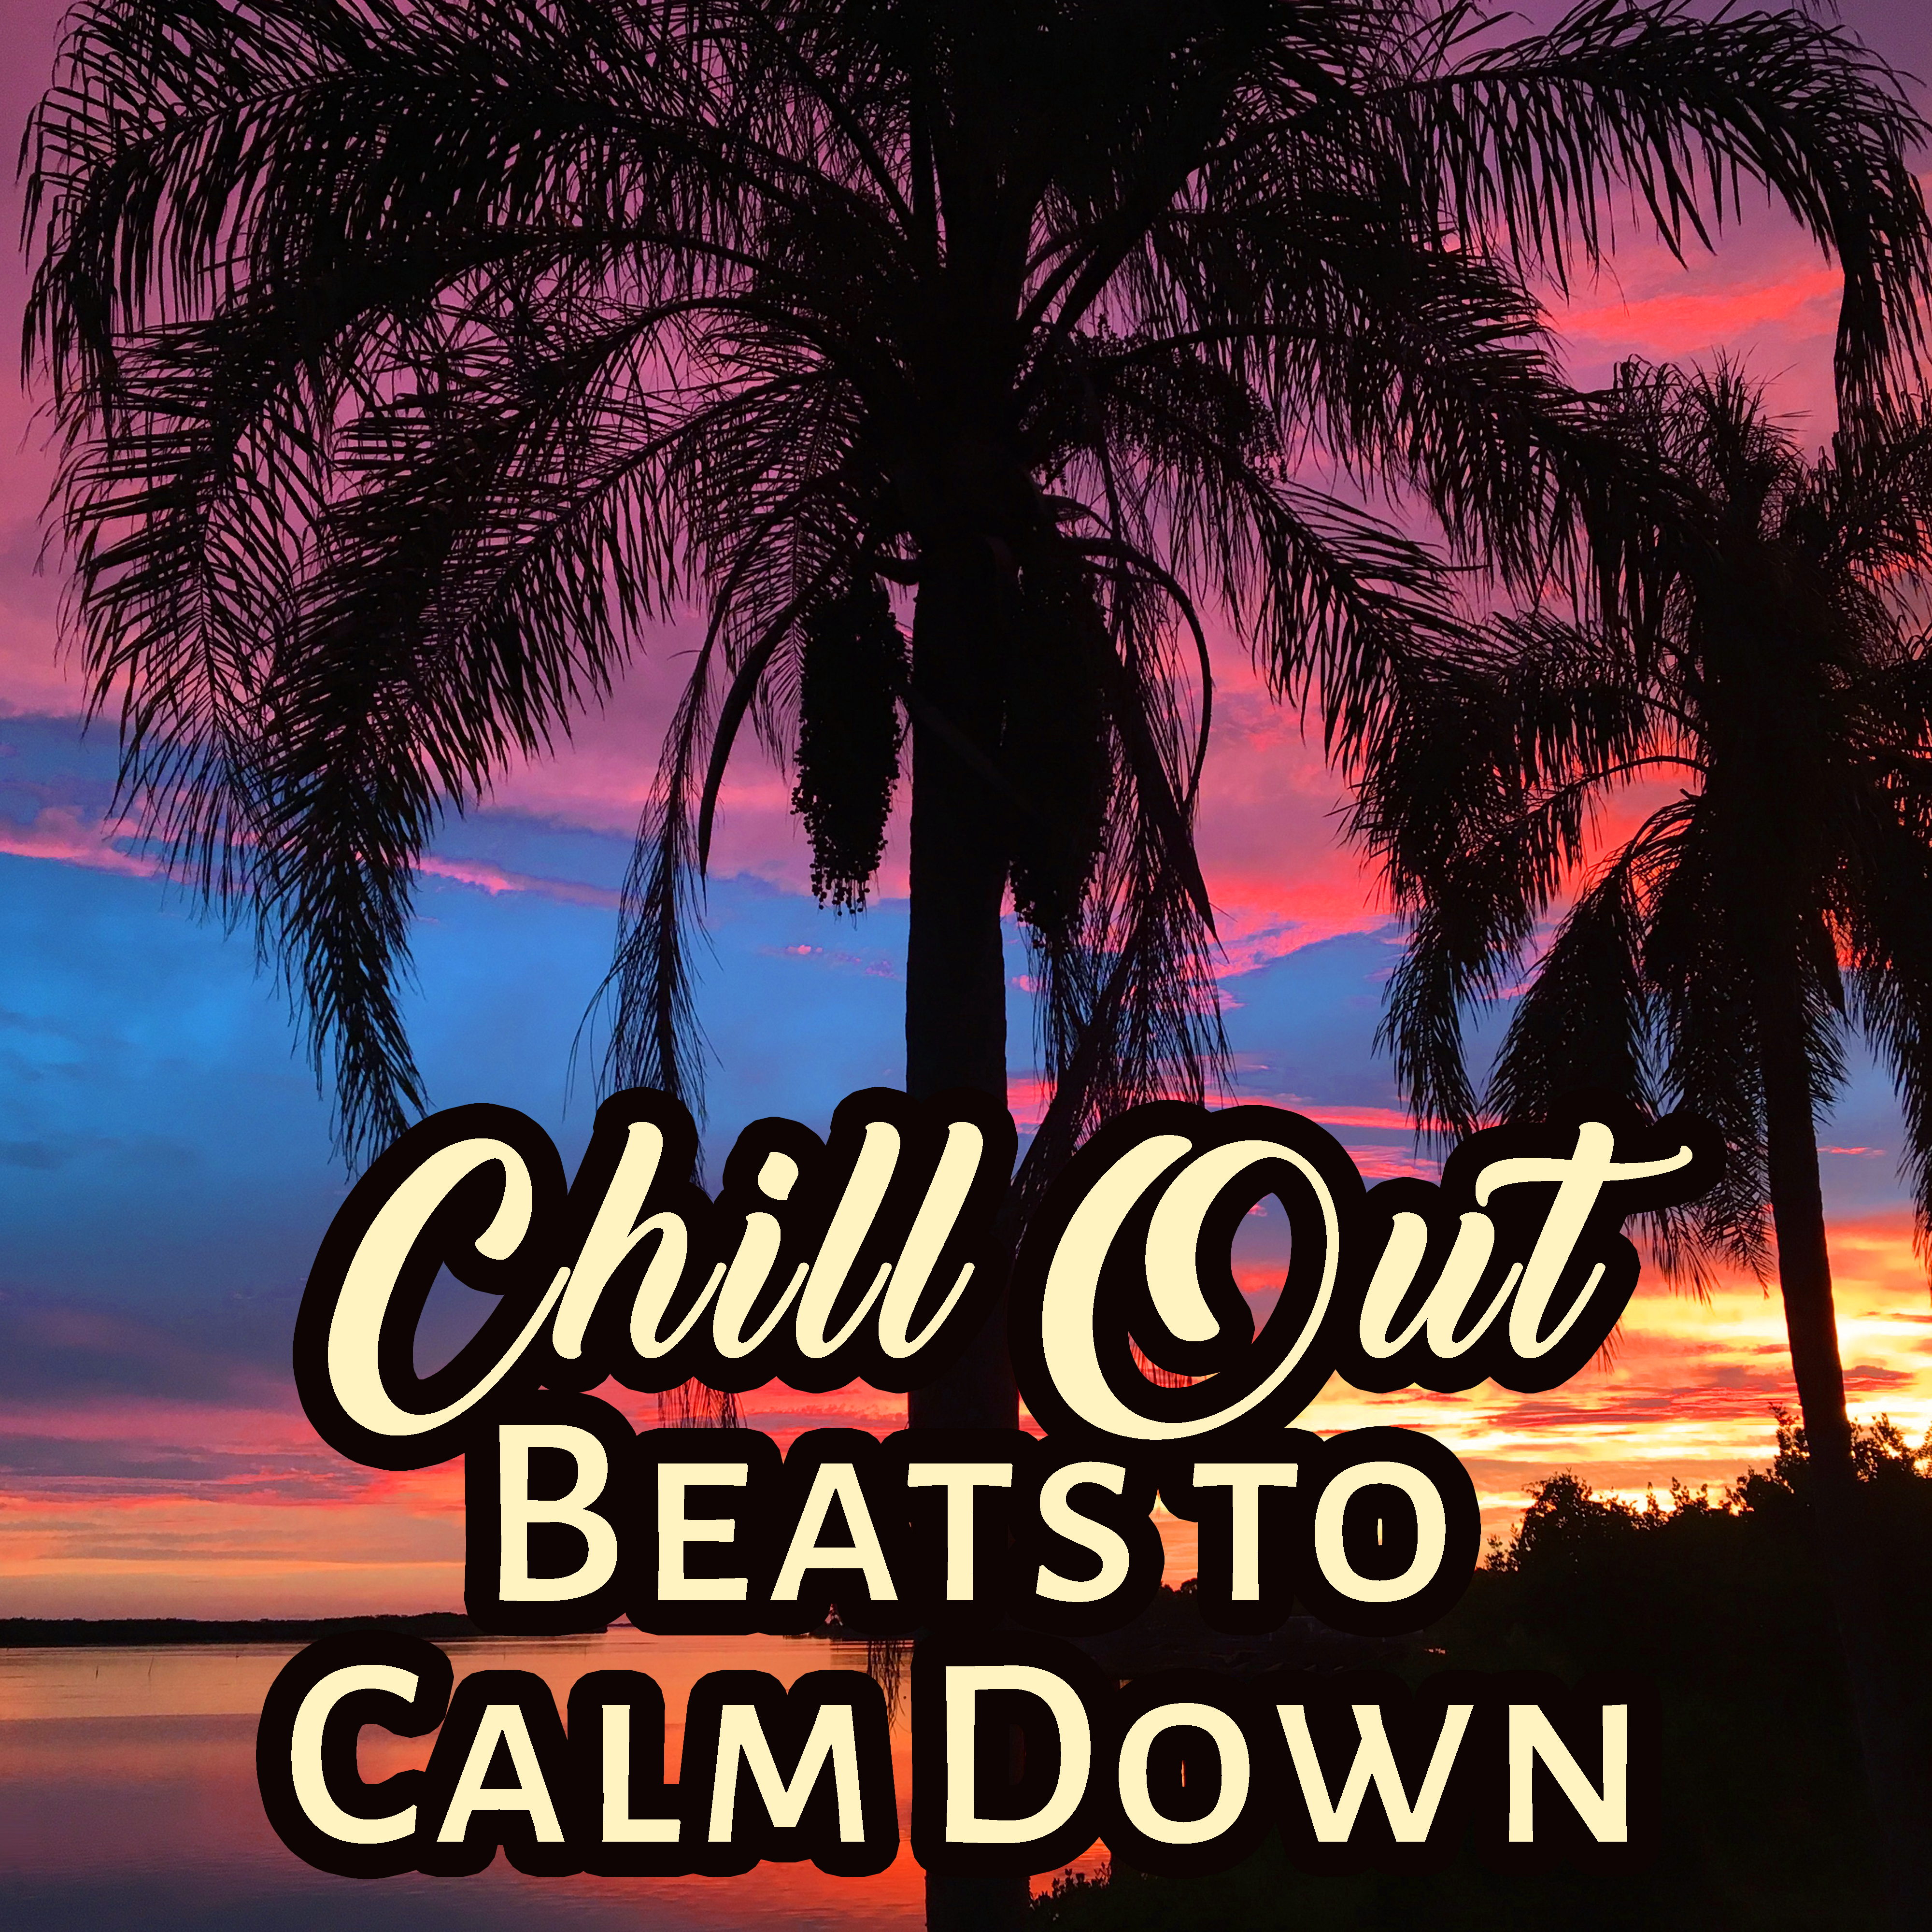 Chill Out Beats to Calm Down – Easy Listening, Relaxing Beats, Beach Lounge, Chilled Vibes